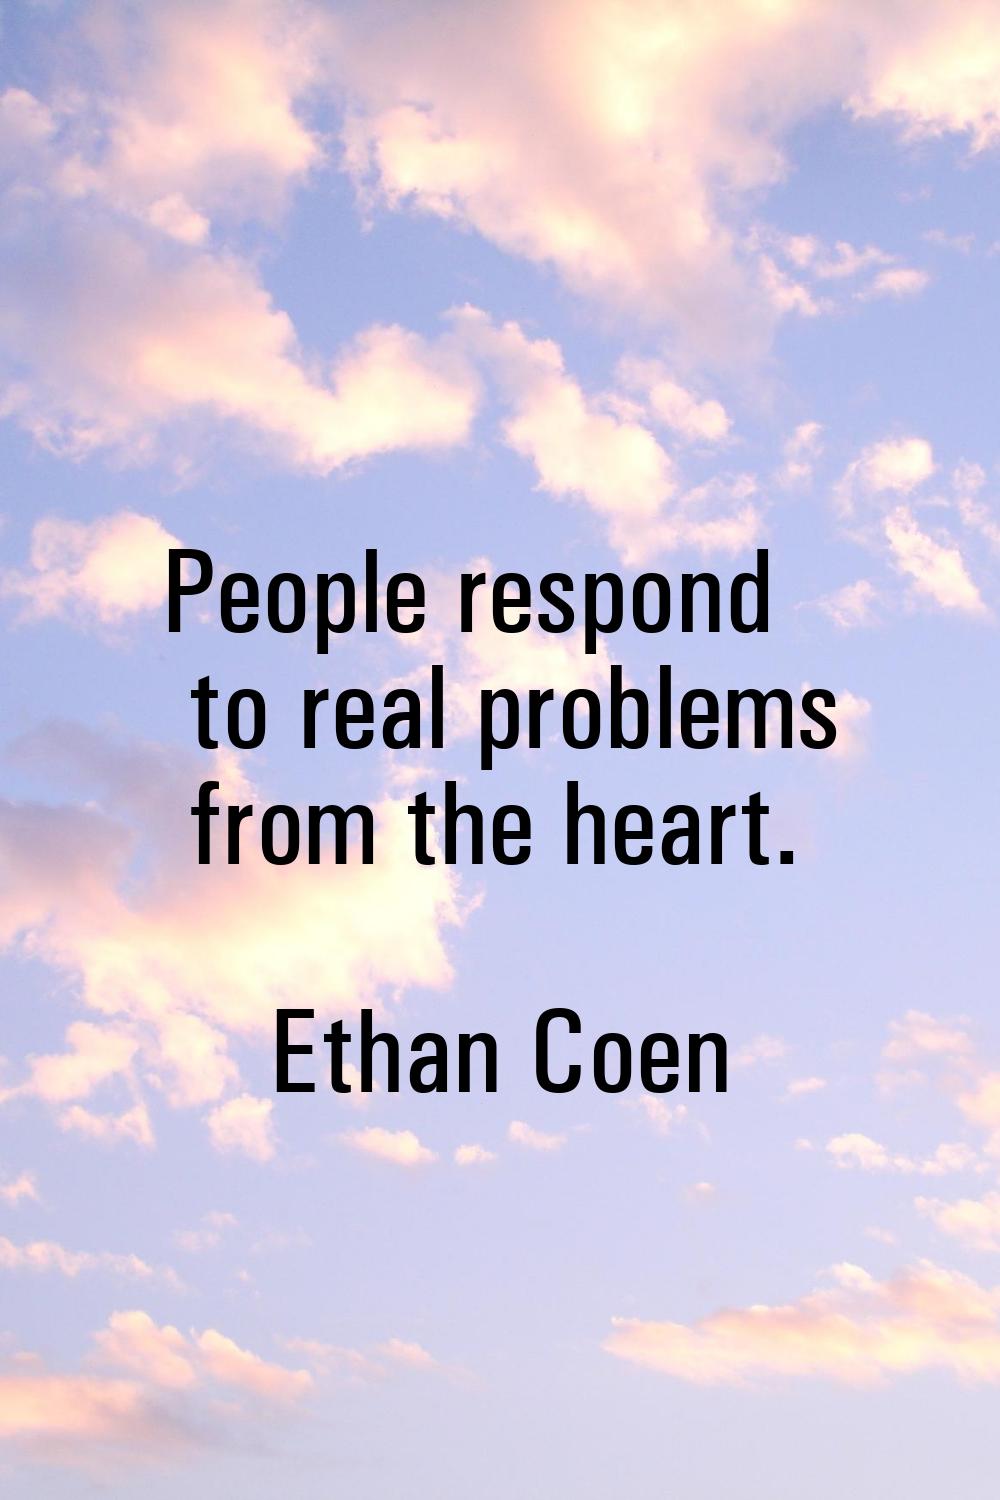 People respond to real problems from the heart.